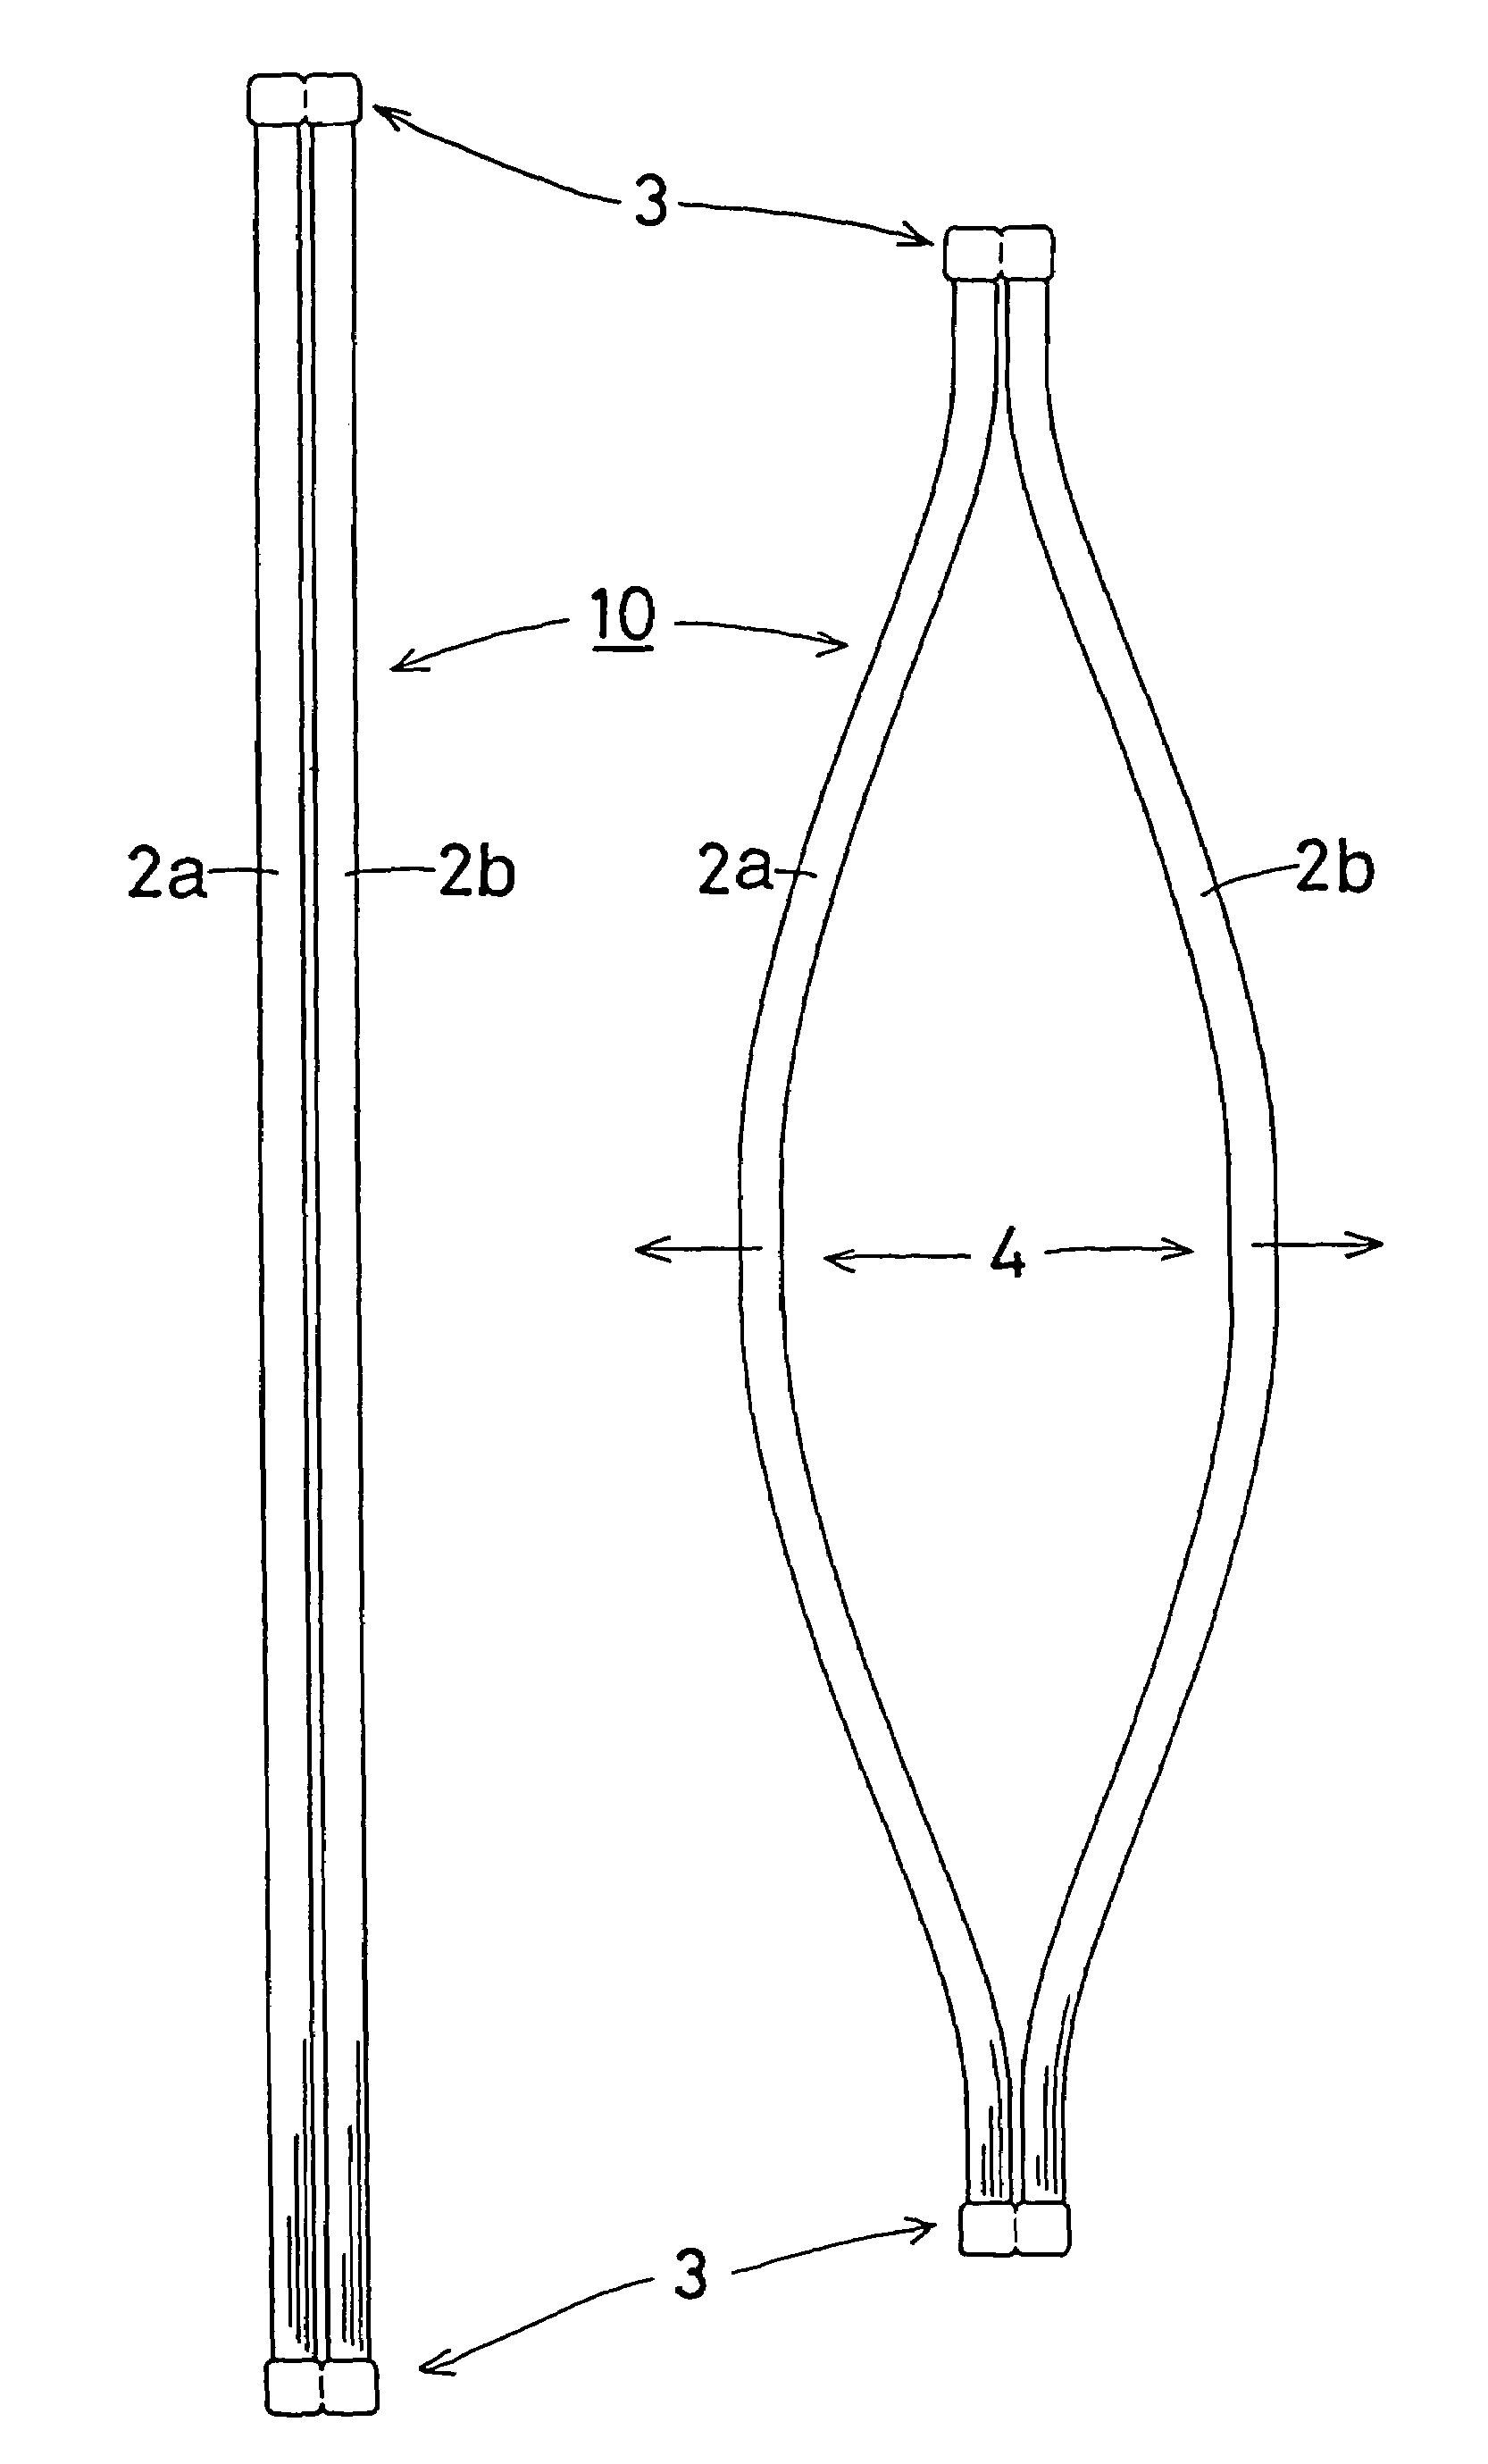 Annular sustained release pheromone-dispenser and its installation tool